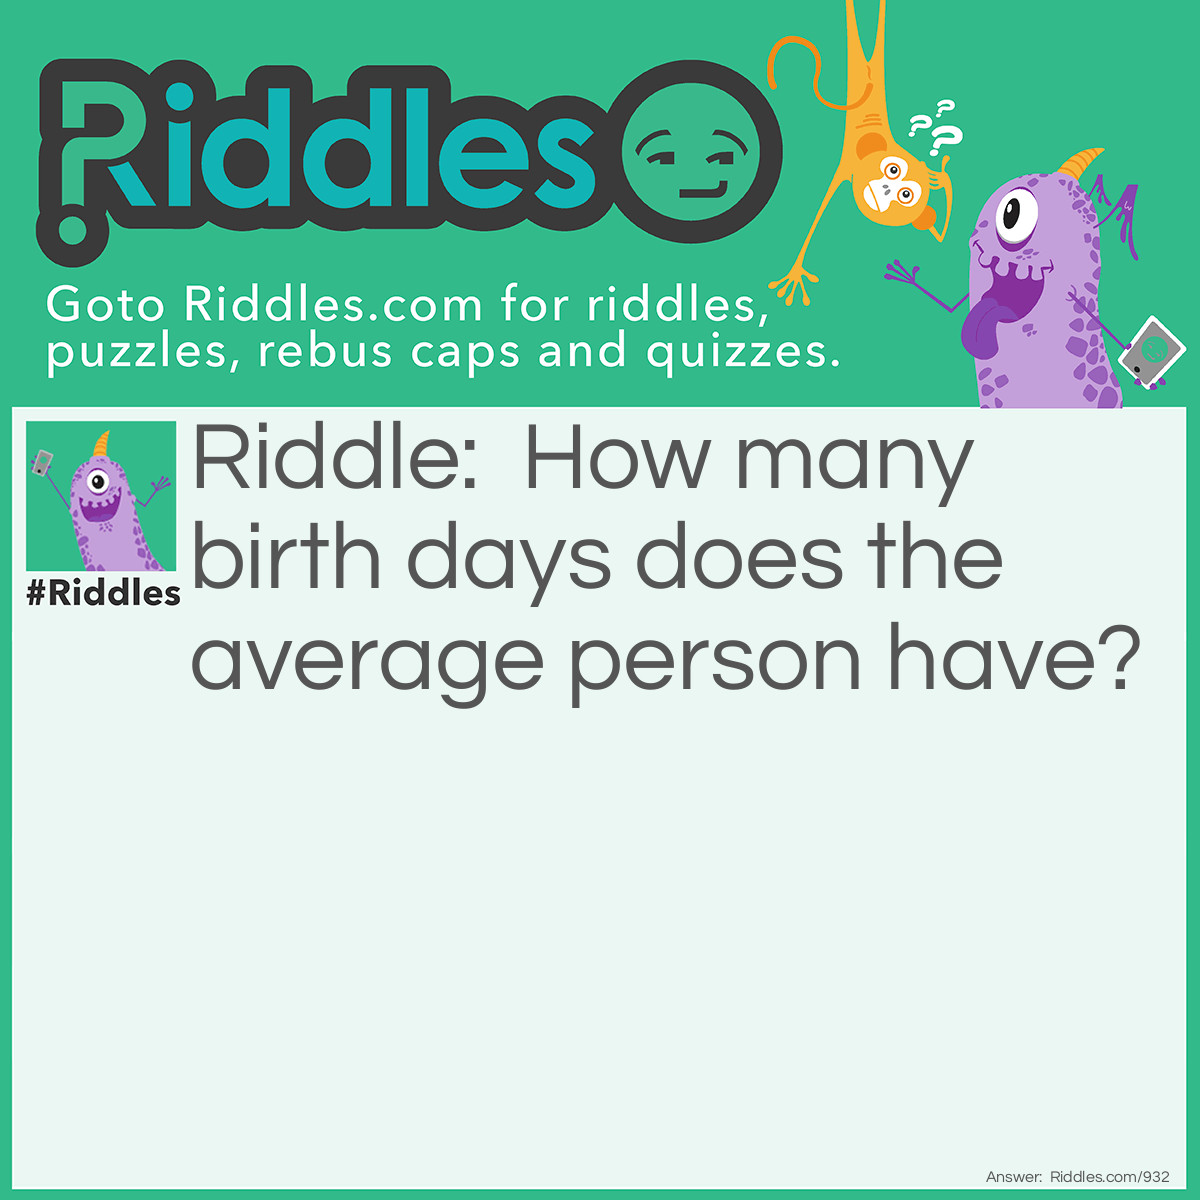 Riddle: How many birth days does the average person have? Answer: One!